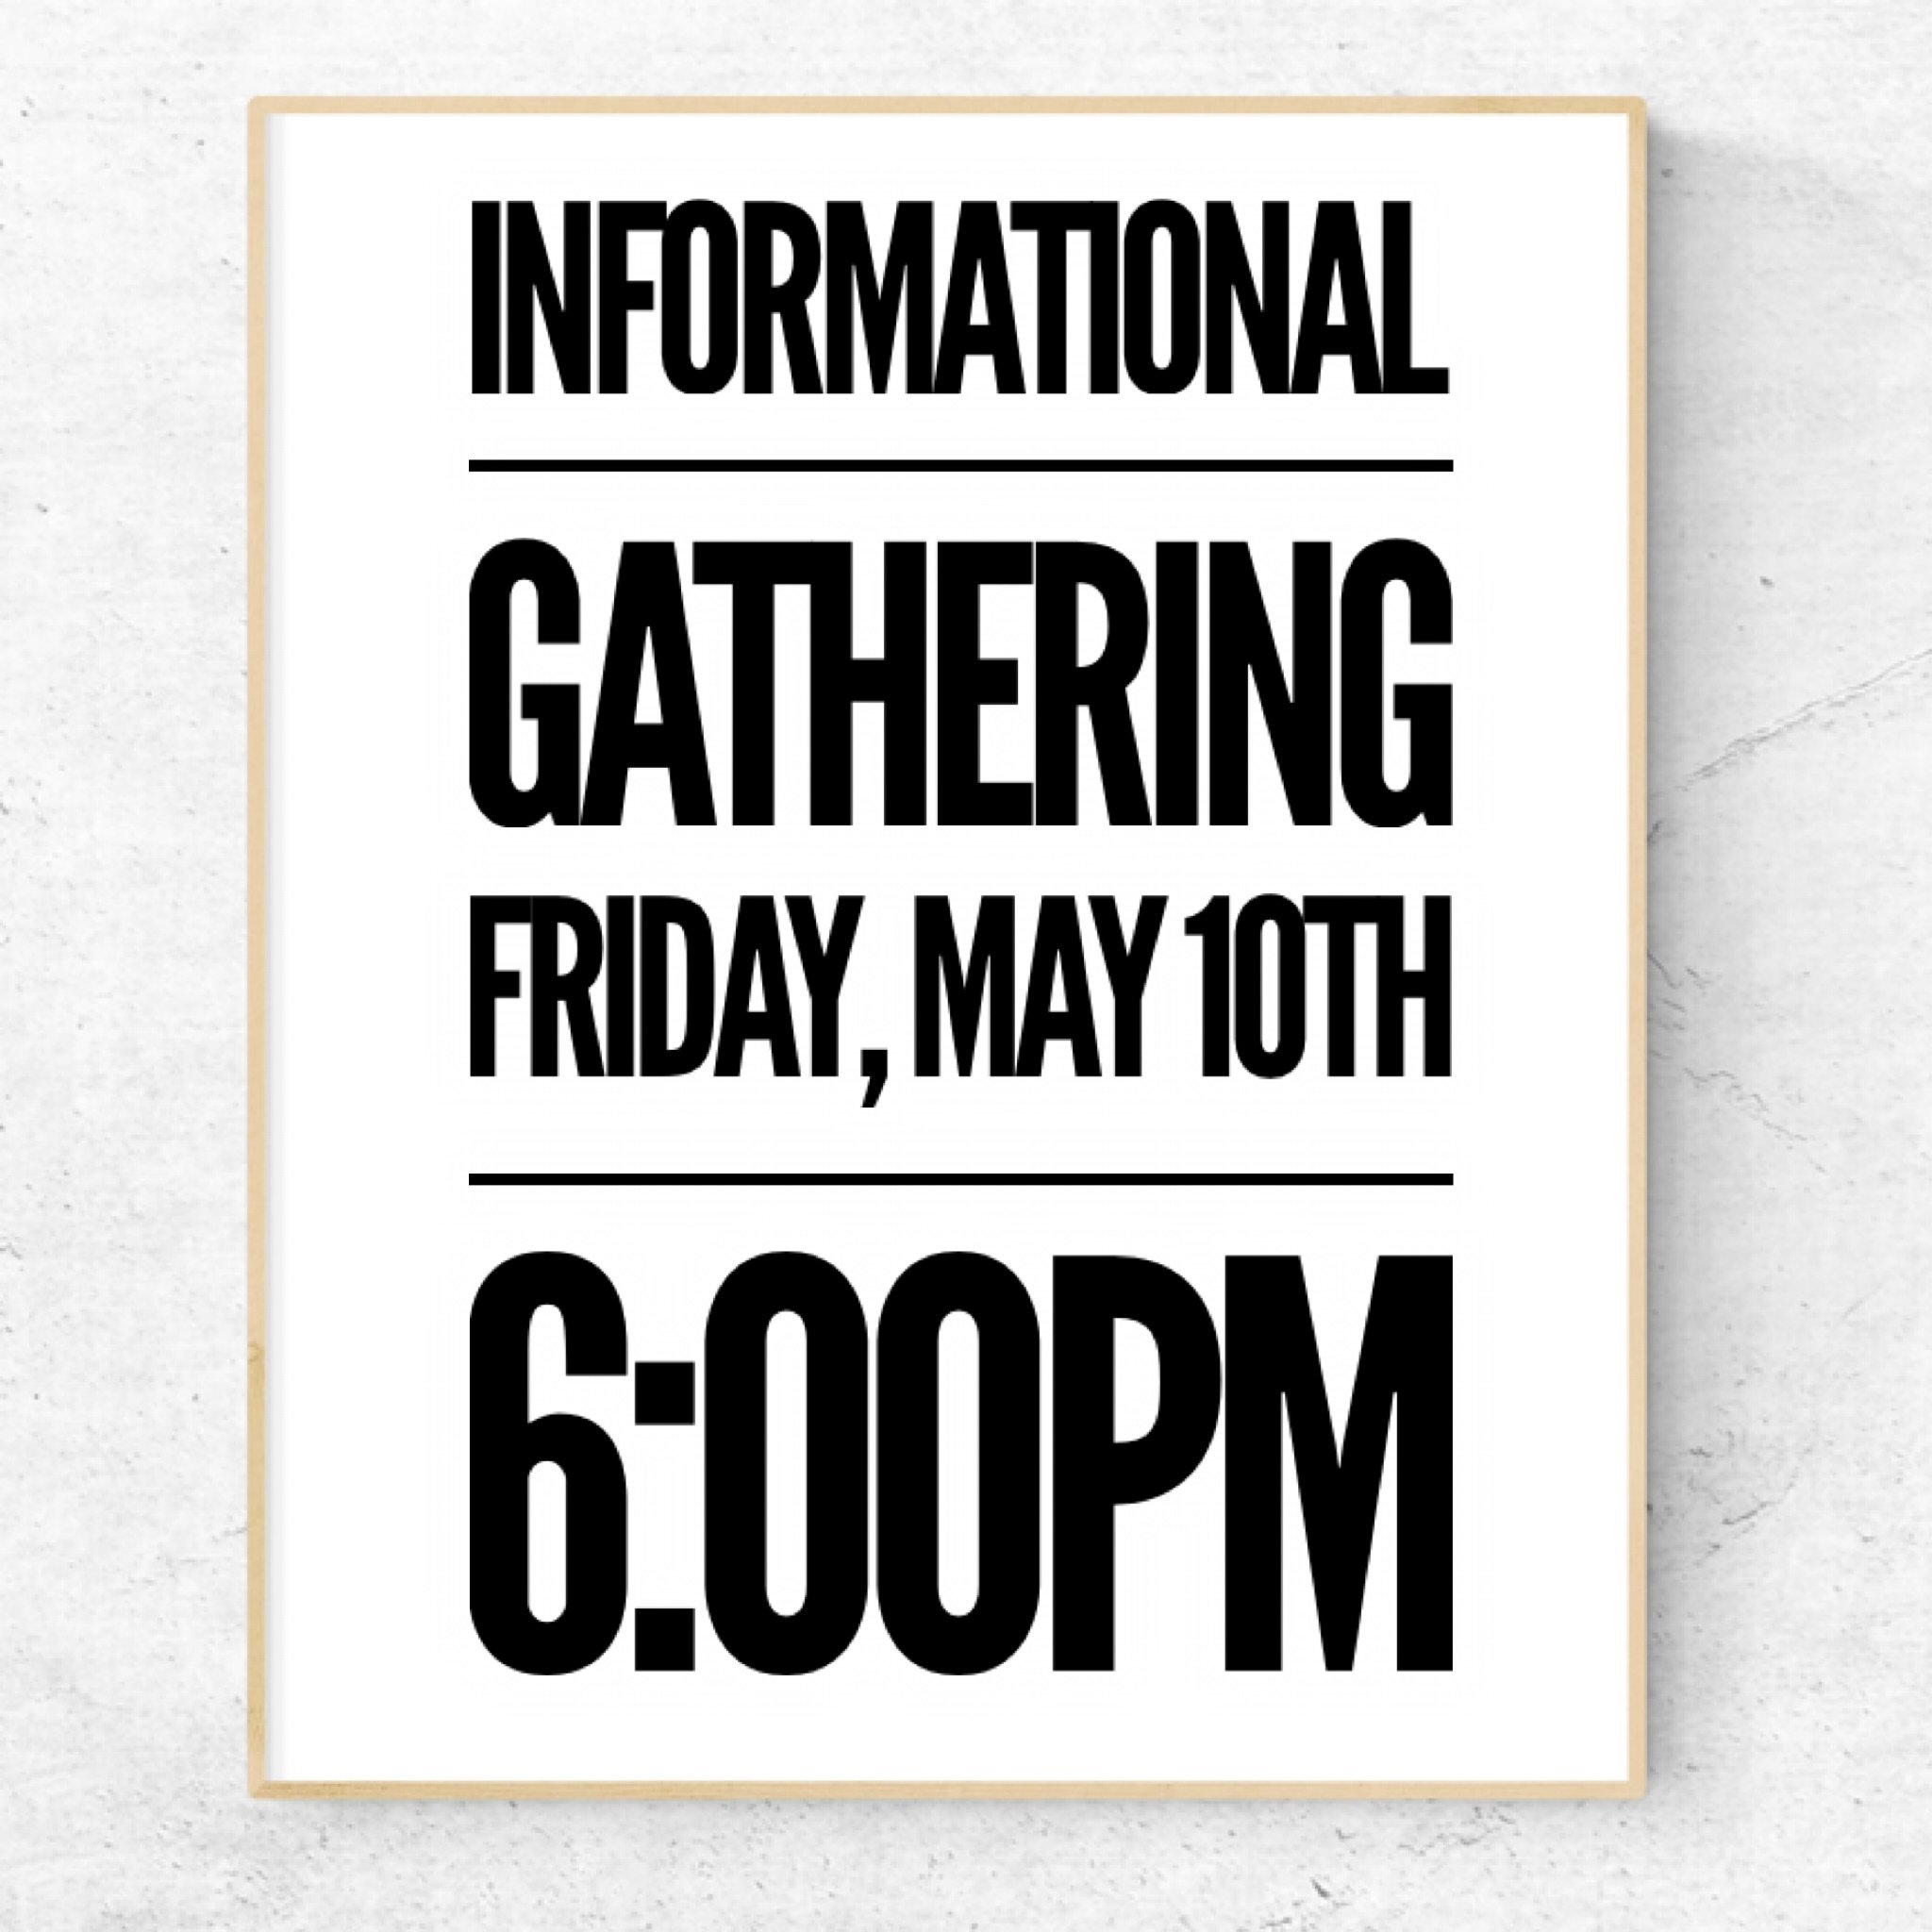 UPDATE ℹ️ new date 
Informational Gathering &bull; Friday, May 10th at 6pm in the sanctuary. 
Our District Superintendent, Rev. Dr. Rick Owen, will join us to share and answer questions you might have about General Conference. Hope to see you there.